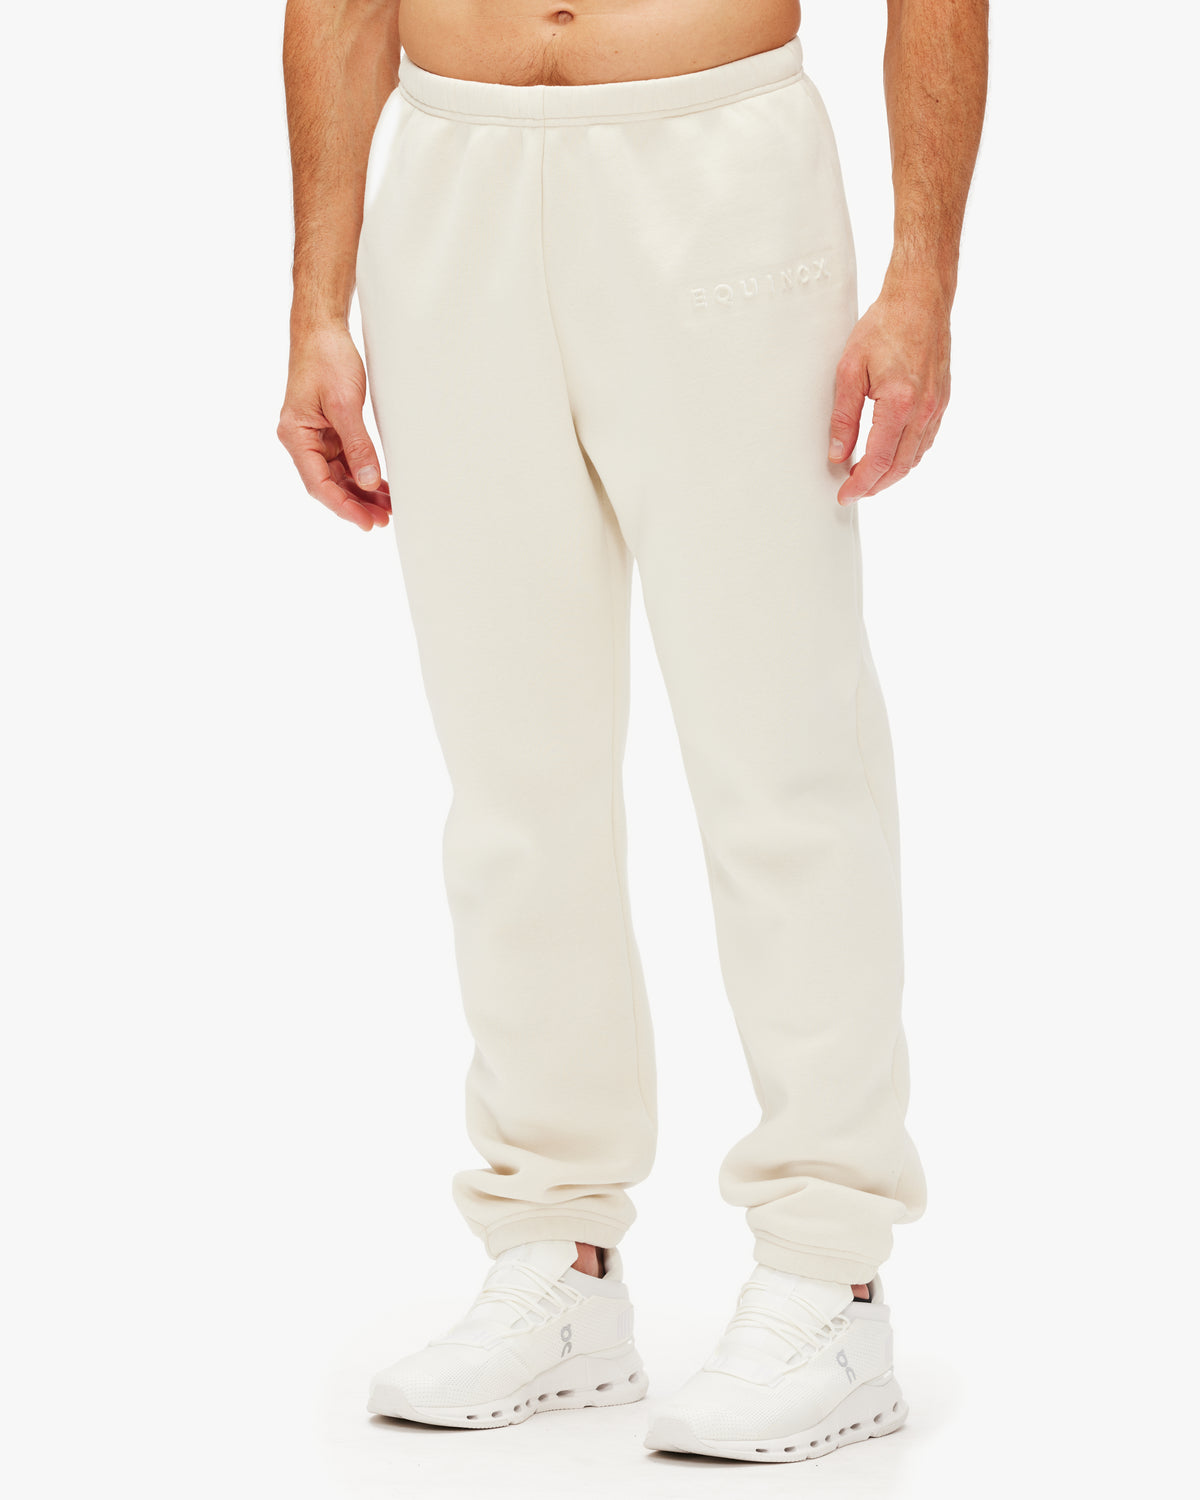 ESPRIT - Mid-rise jogger style trousers at our online shop